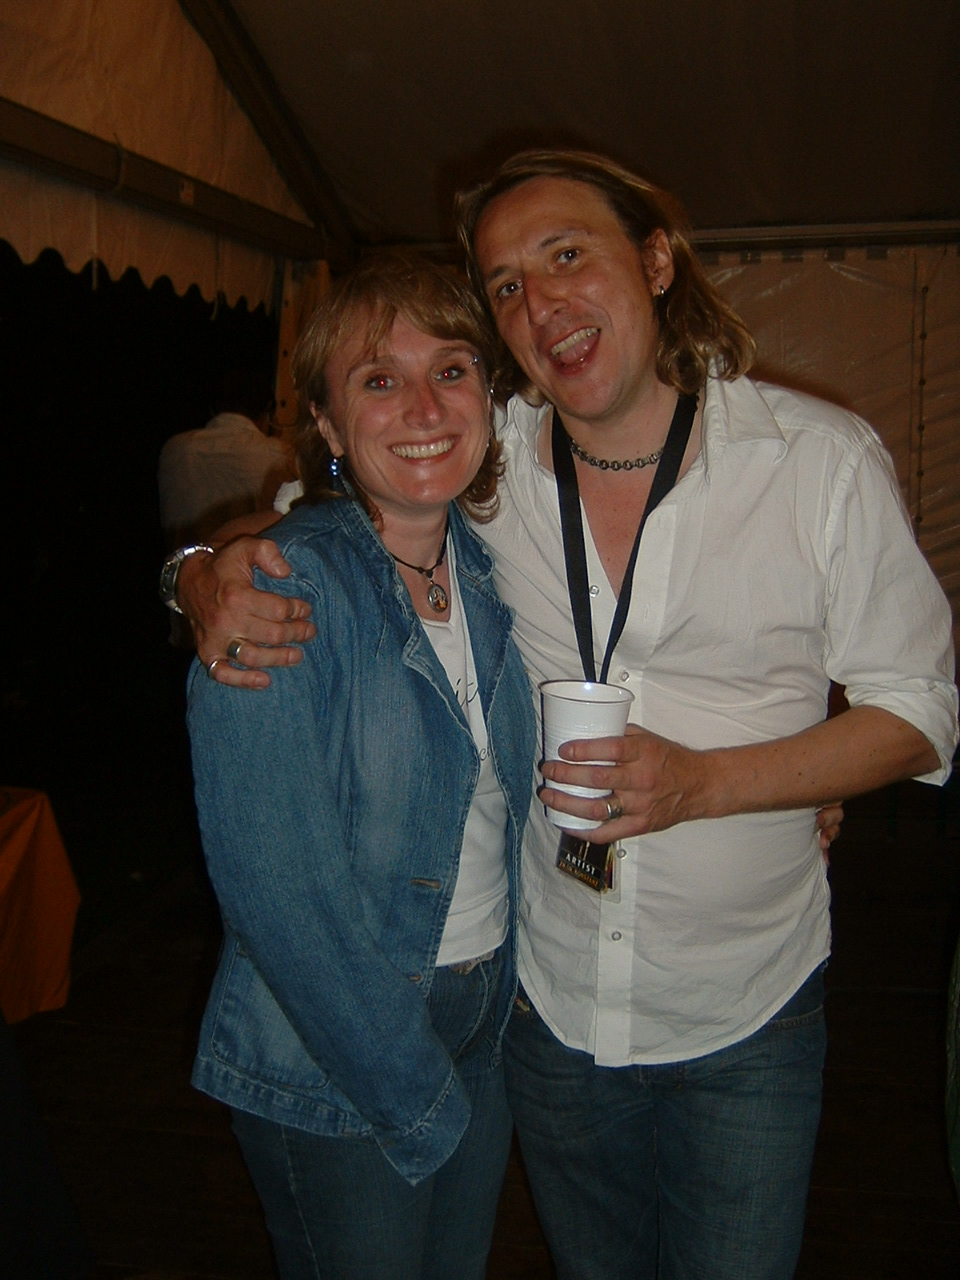 ...with Thomas backstage, August, 23rd 2005, Konstanz, Bodenseestadion